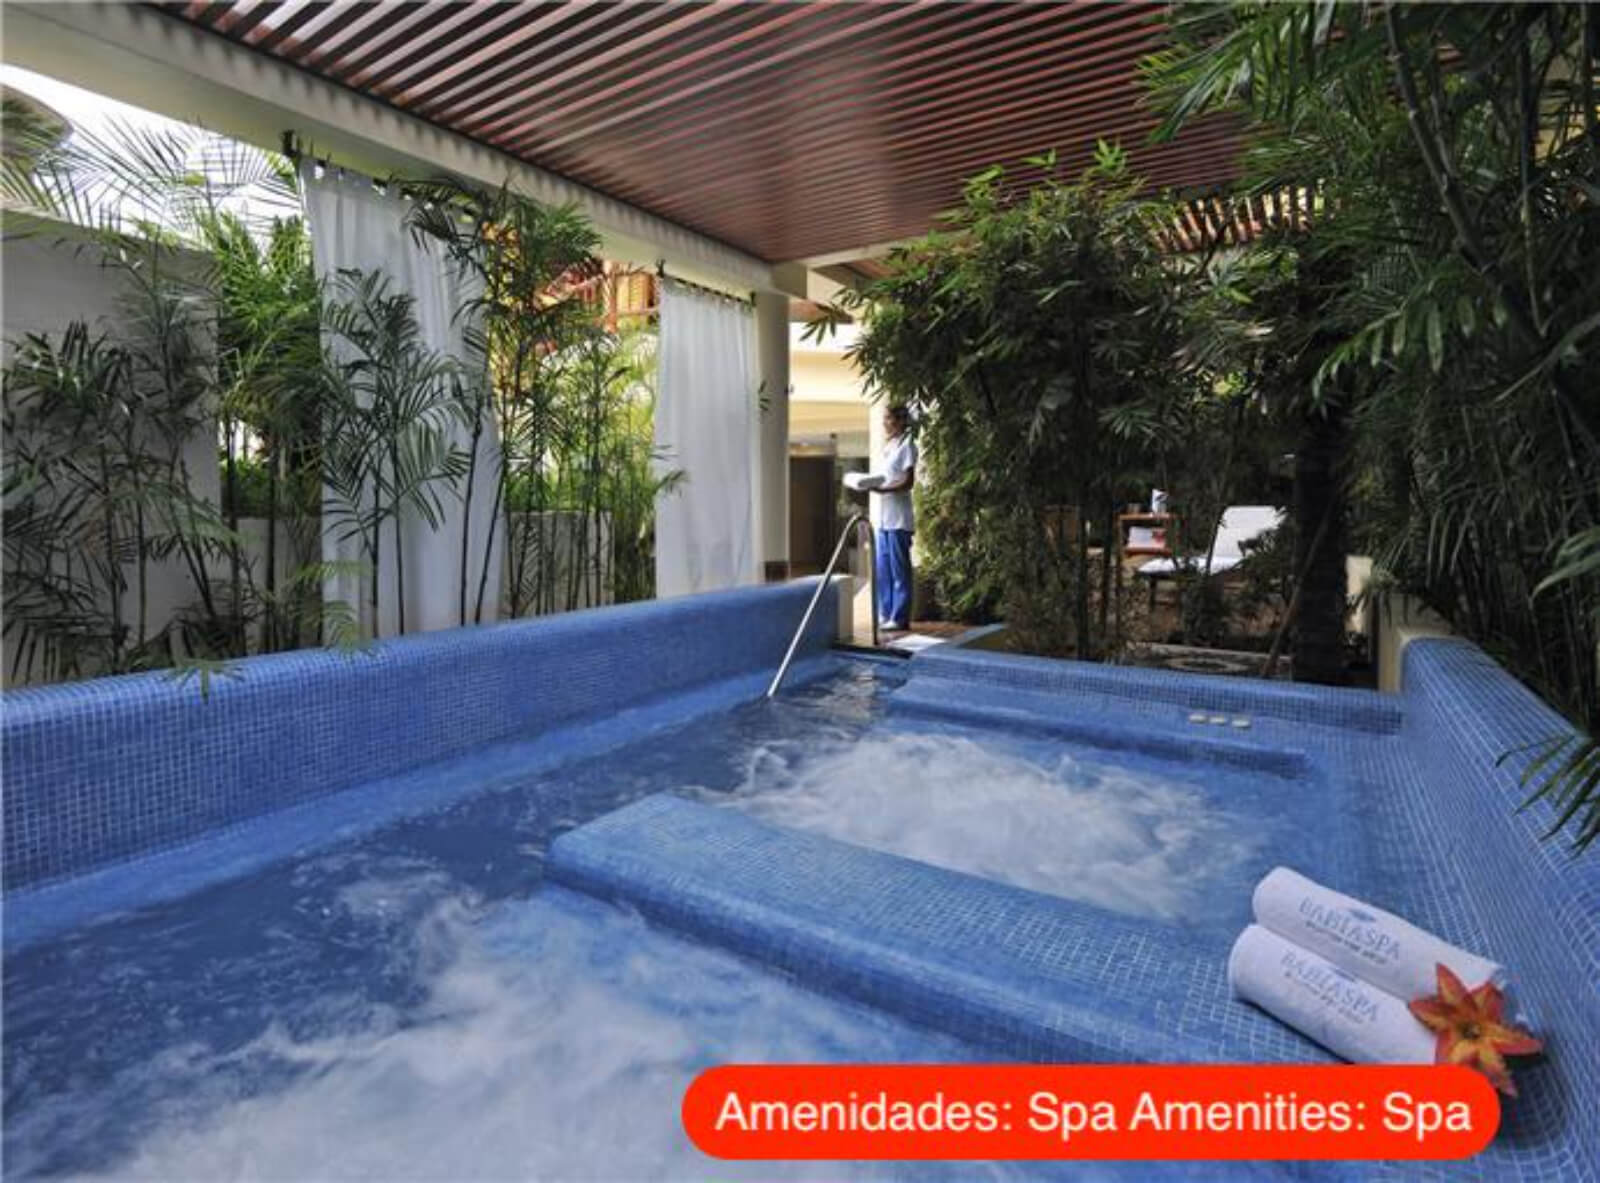 Villa with private pool and garden, 5 bedrooms, marble floor, new for sale in Aldea Zama, Tulum.